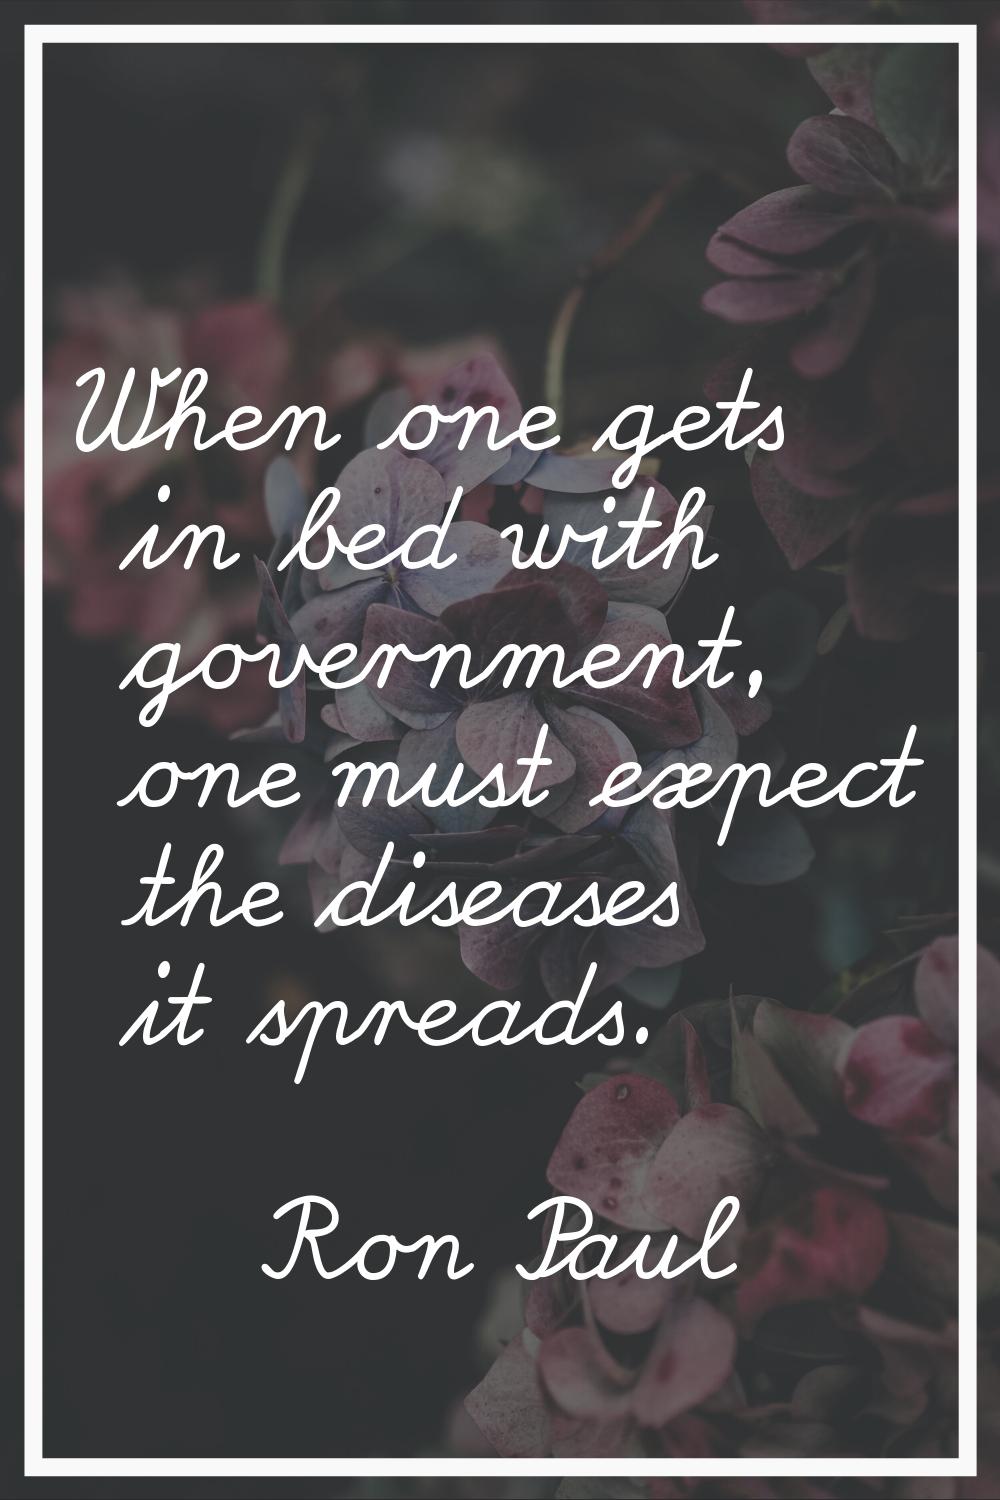 When one gets in bed with government, one must expect the diseases it spreads.